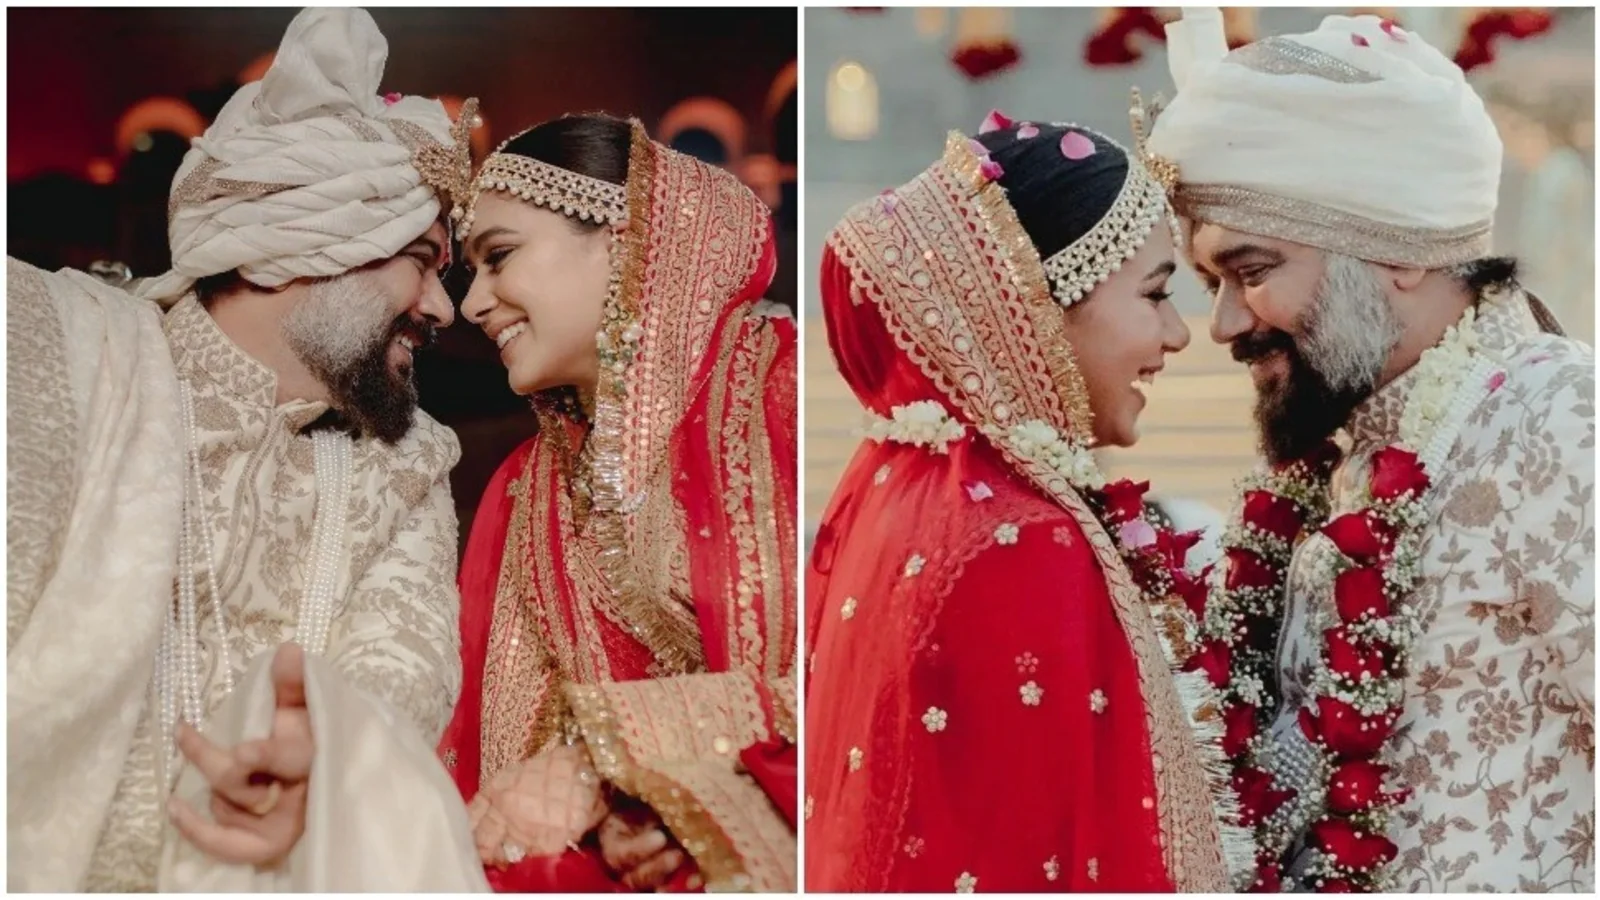 Luv Ranjan, Alisha Vaid finally share first official pictures as bride and groom. Check out their fairytale Agra wedding